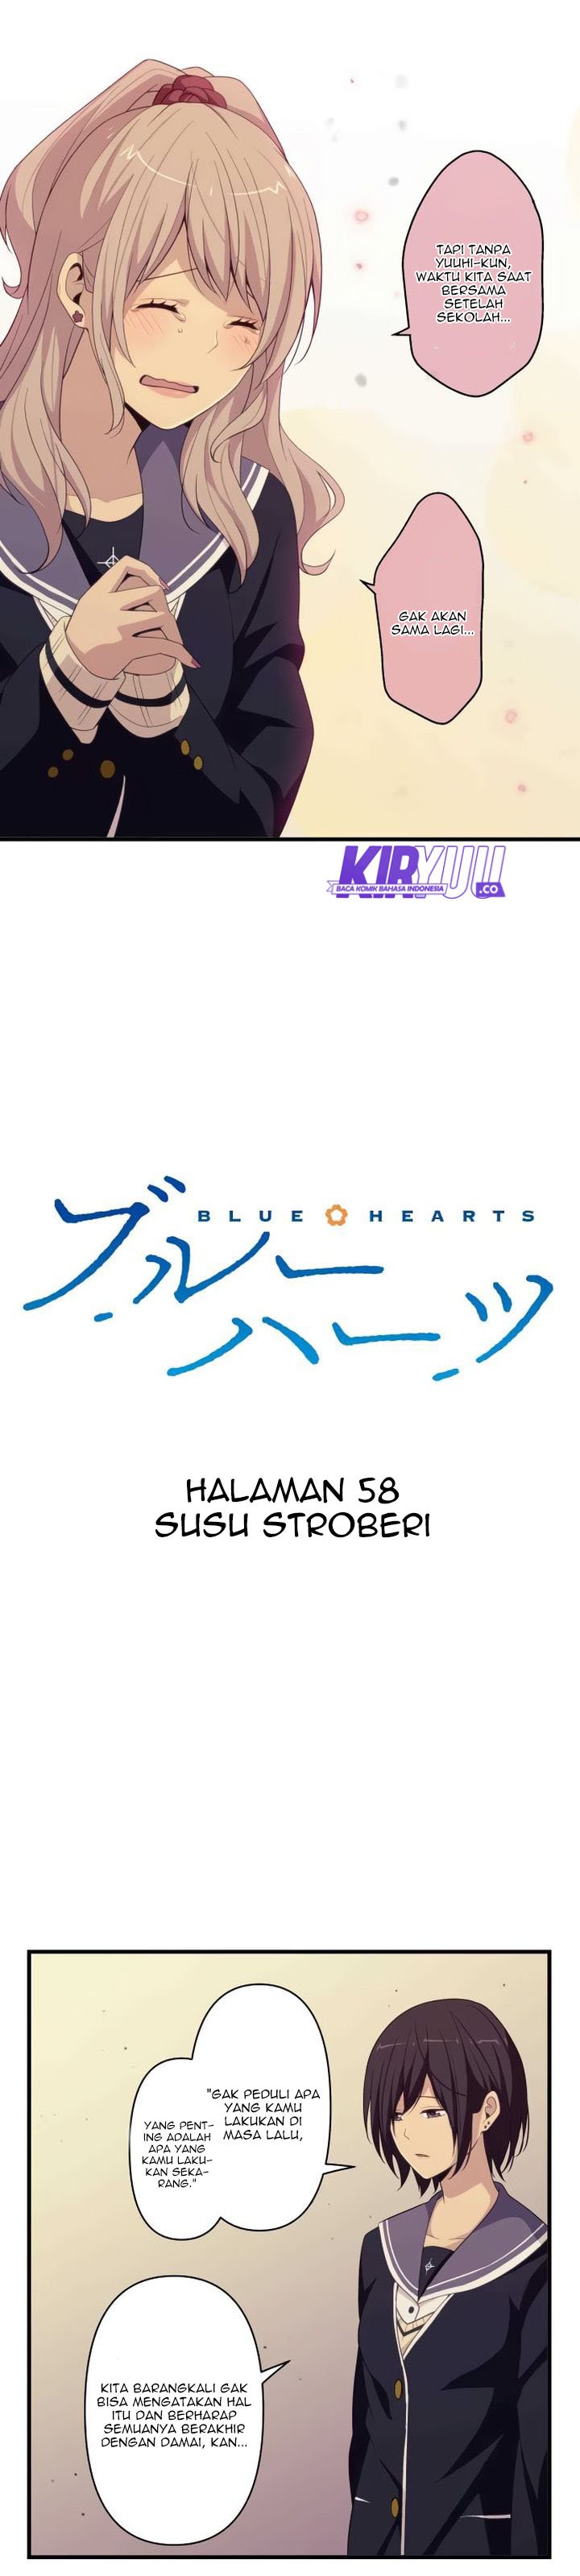 Blue Hearts Chapter 58